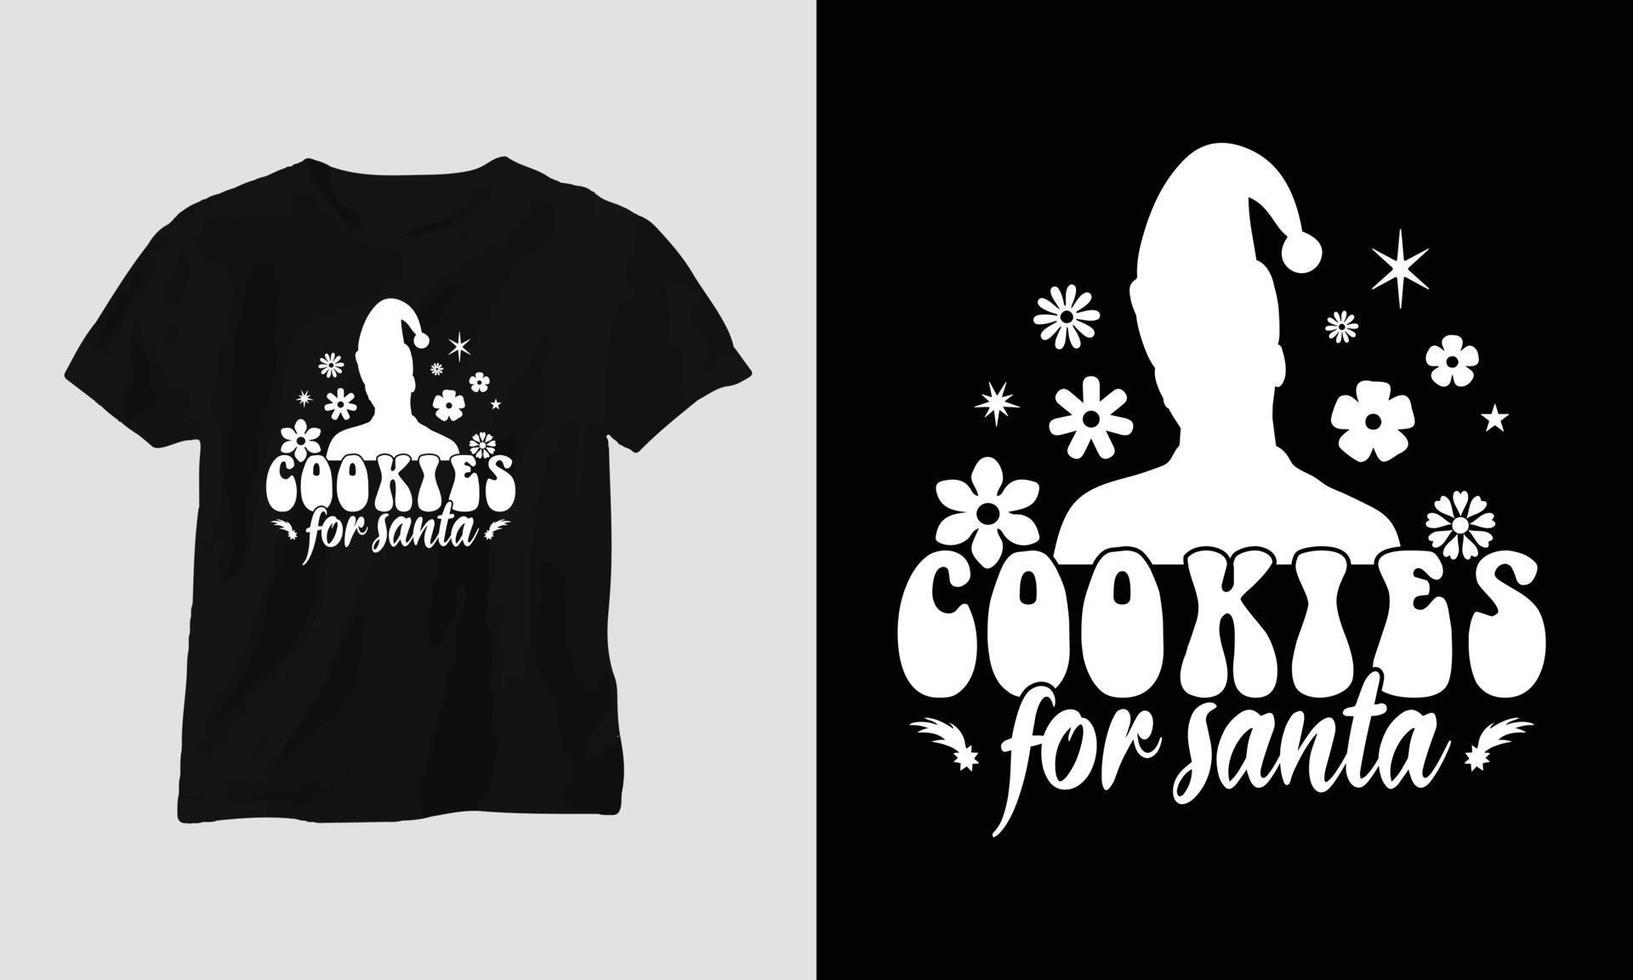 Cookies for Santa - Groovy Christmas SVG T-shirt and apparel design vector